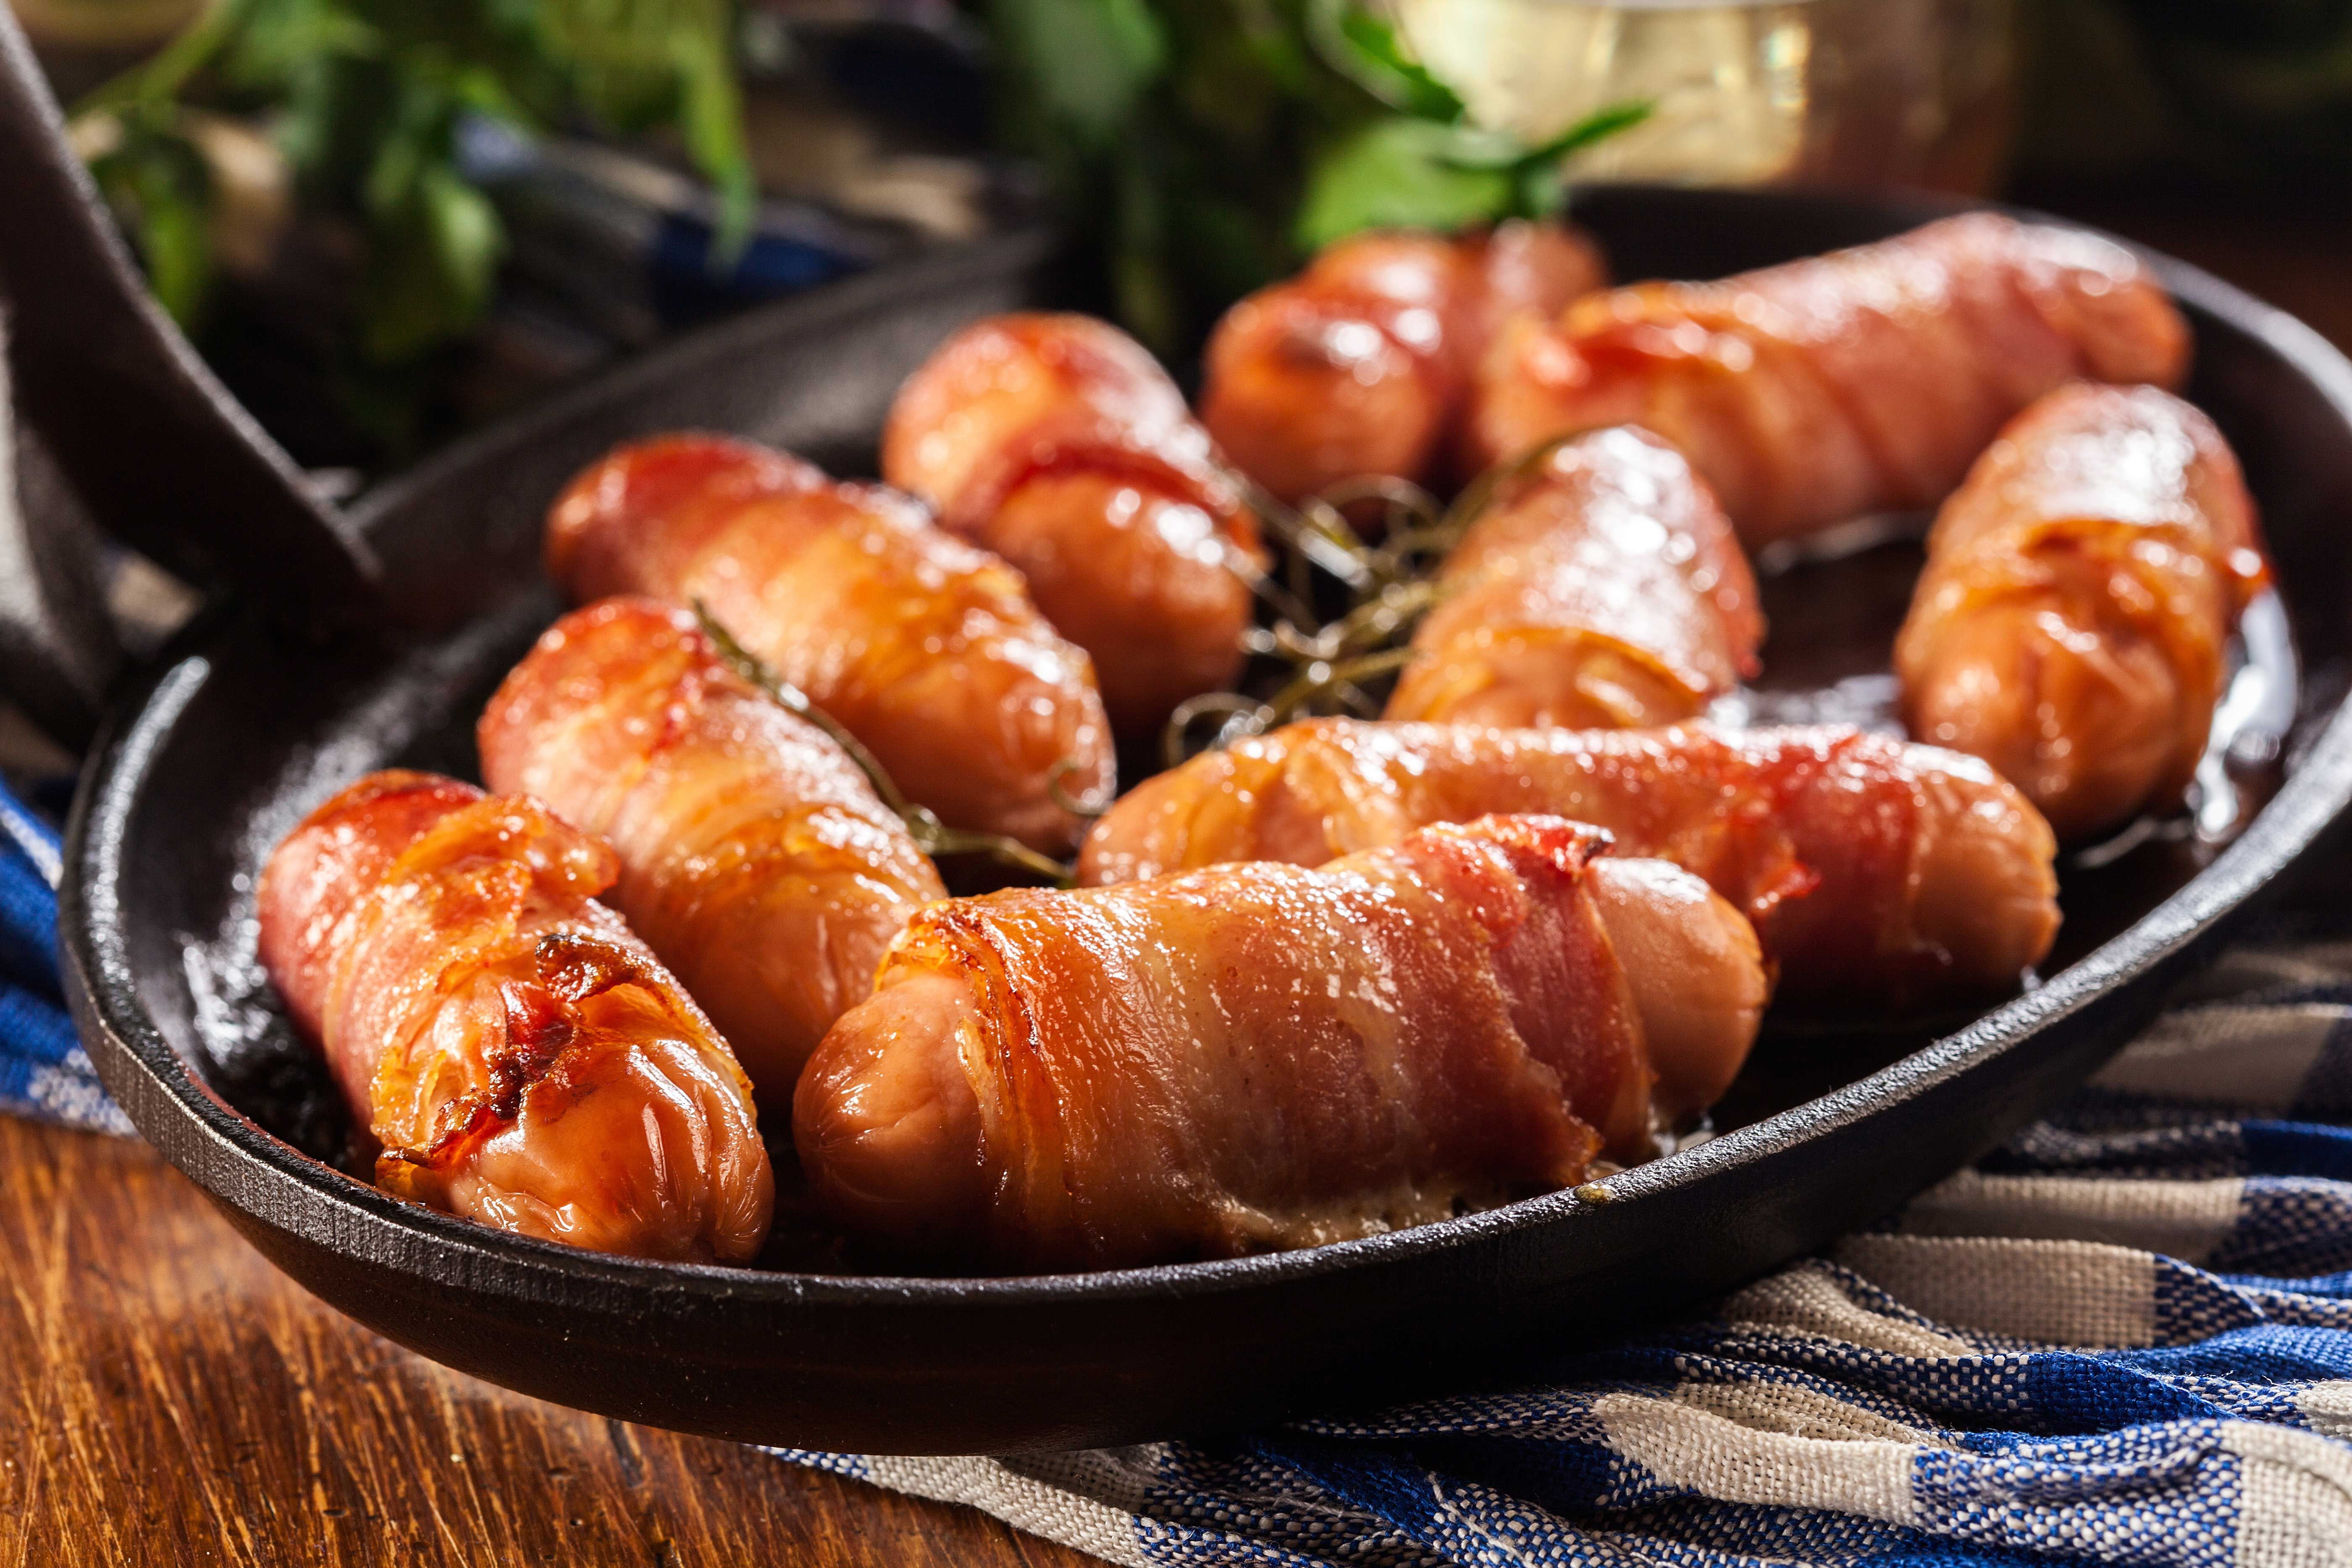 Best Pigs In Blankets For Christmas 2020